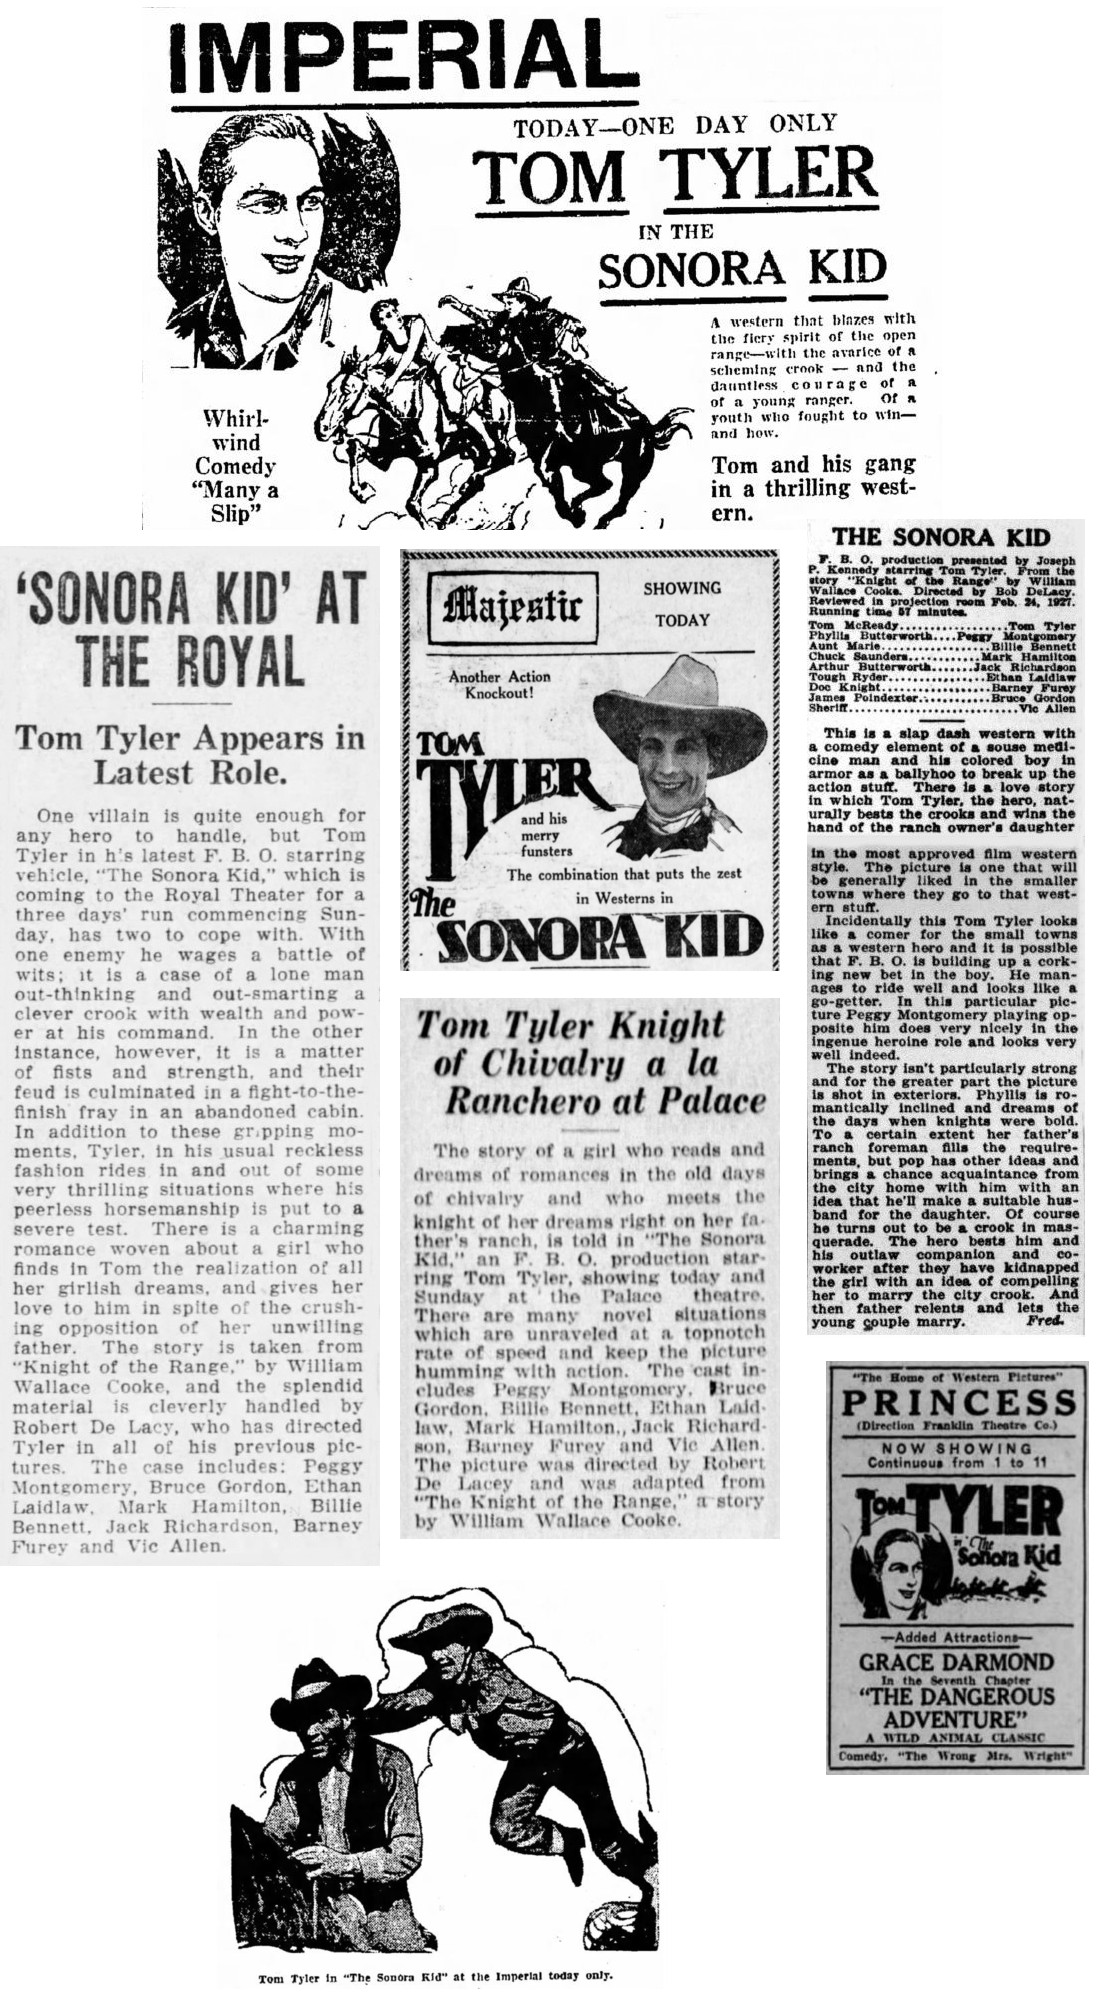 The Sonora Kid pictures of Tom film reviews cinema ads